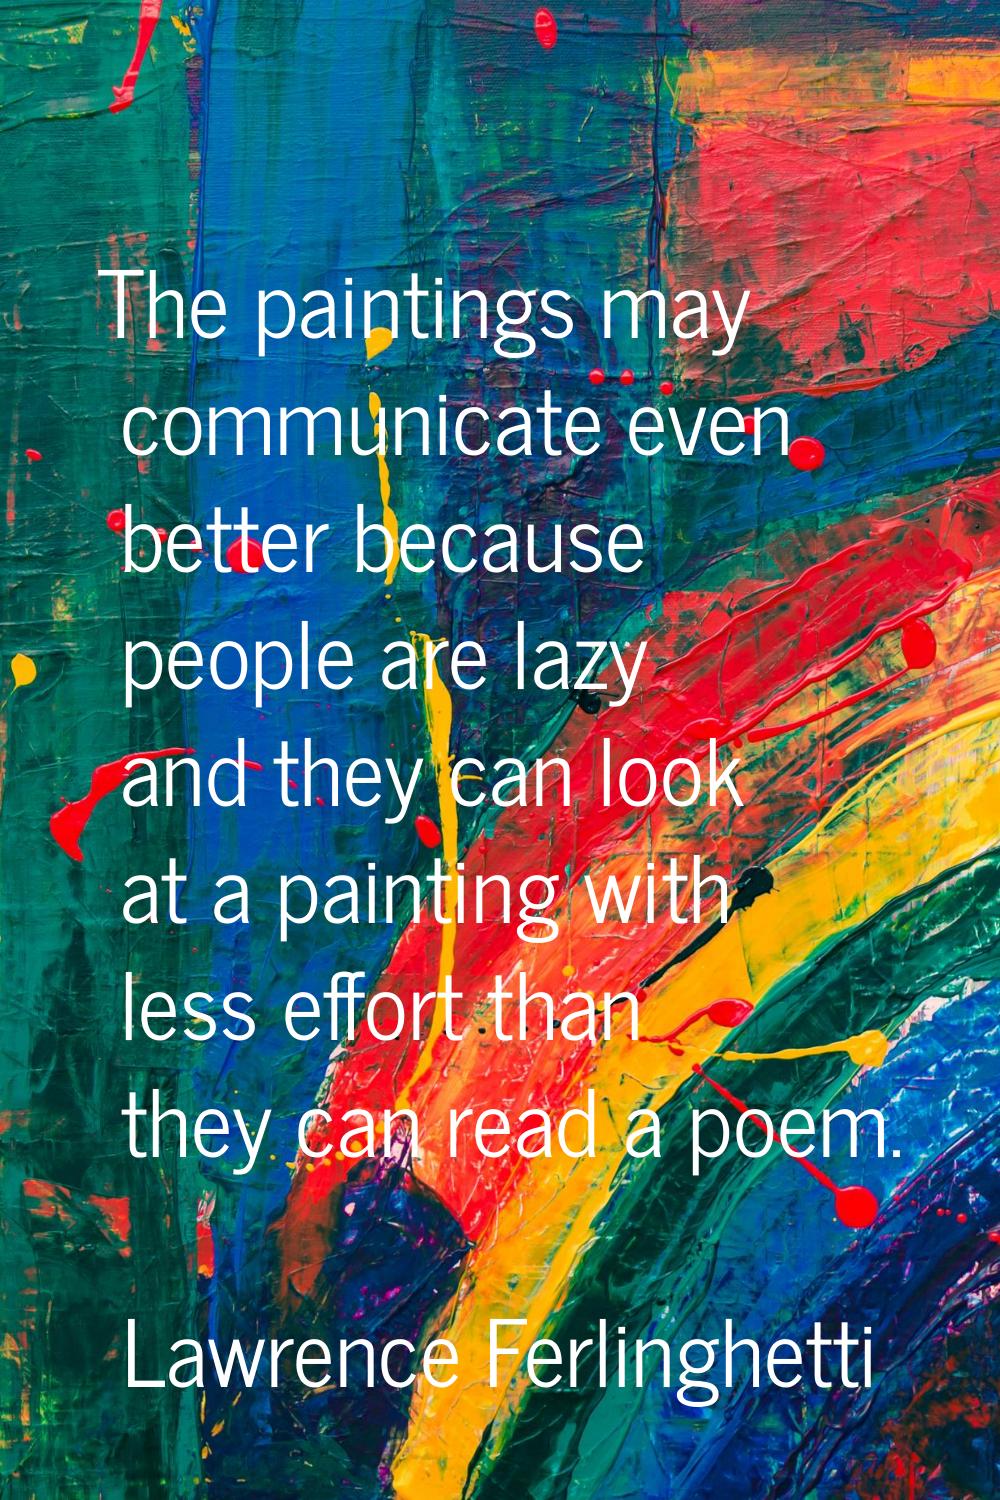 The paintings may communicate even better because people are lazy and they can look at a painting w